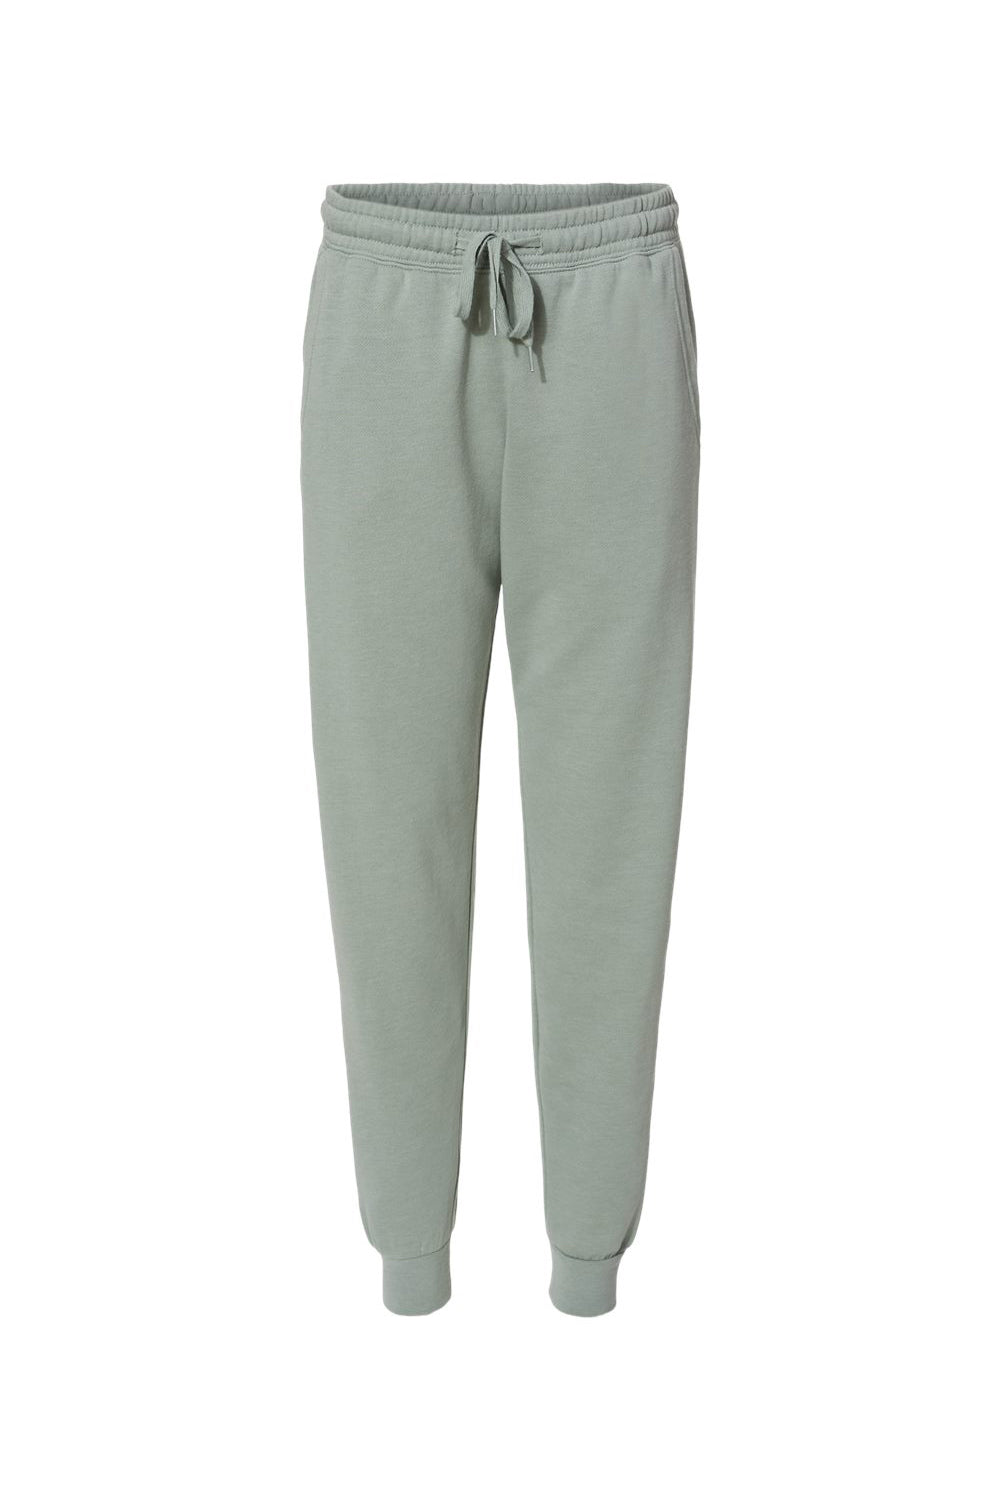 Independent Trading Co. PRM20PNT Womens California Wave Wash Sweatpants w/ Pockets Sage Green Flat Front